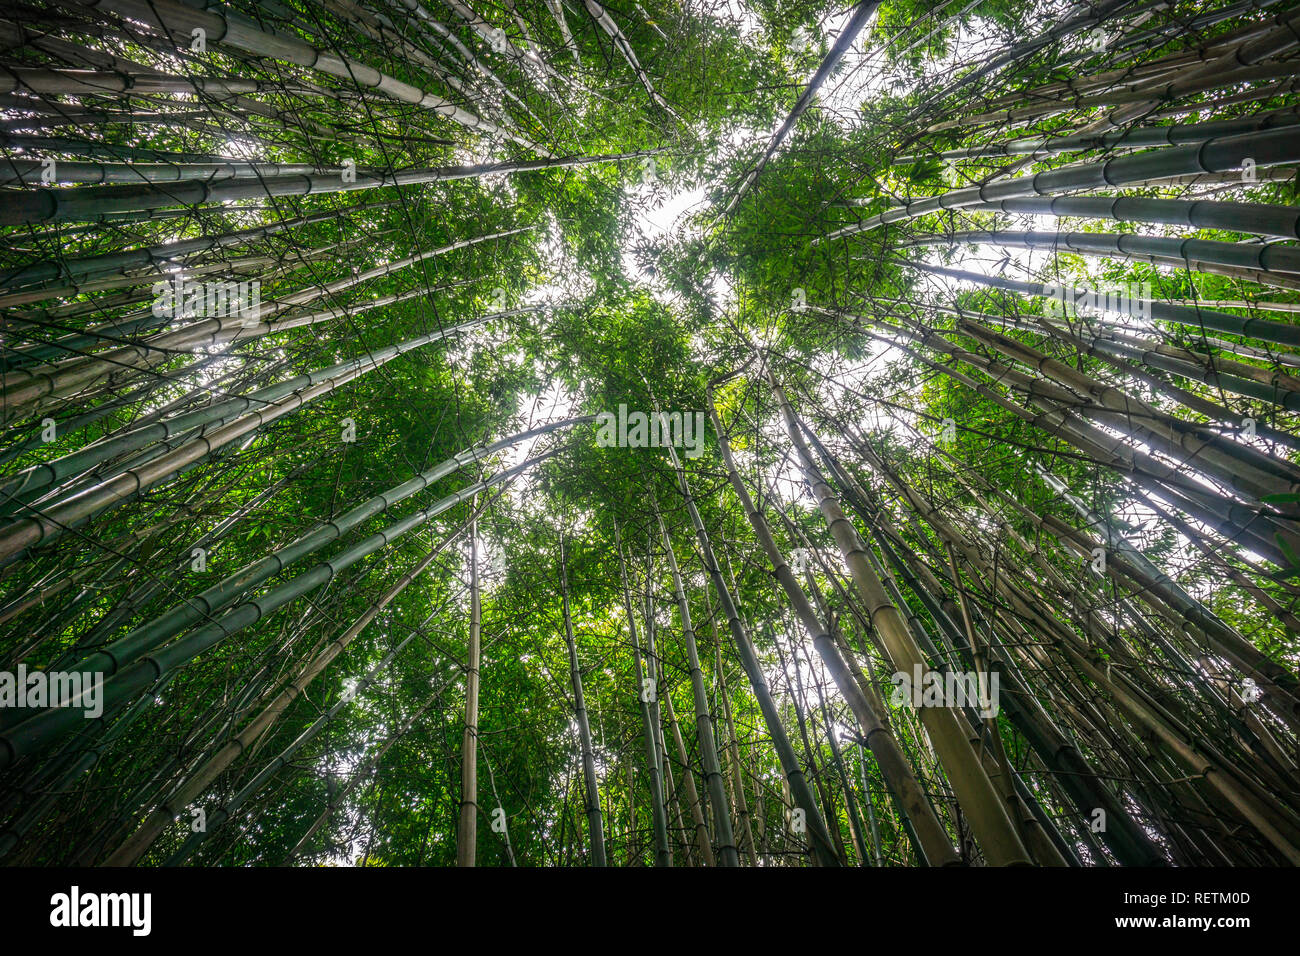 Looking up in a bamboo forest Stock Photo